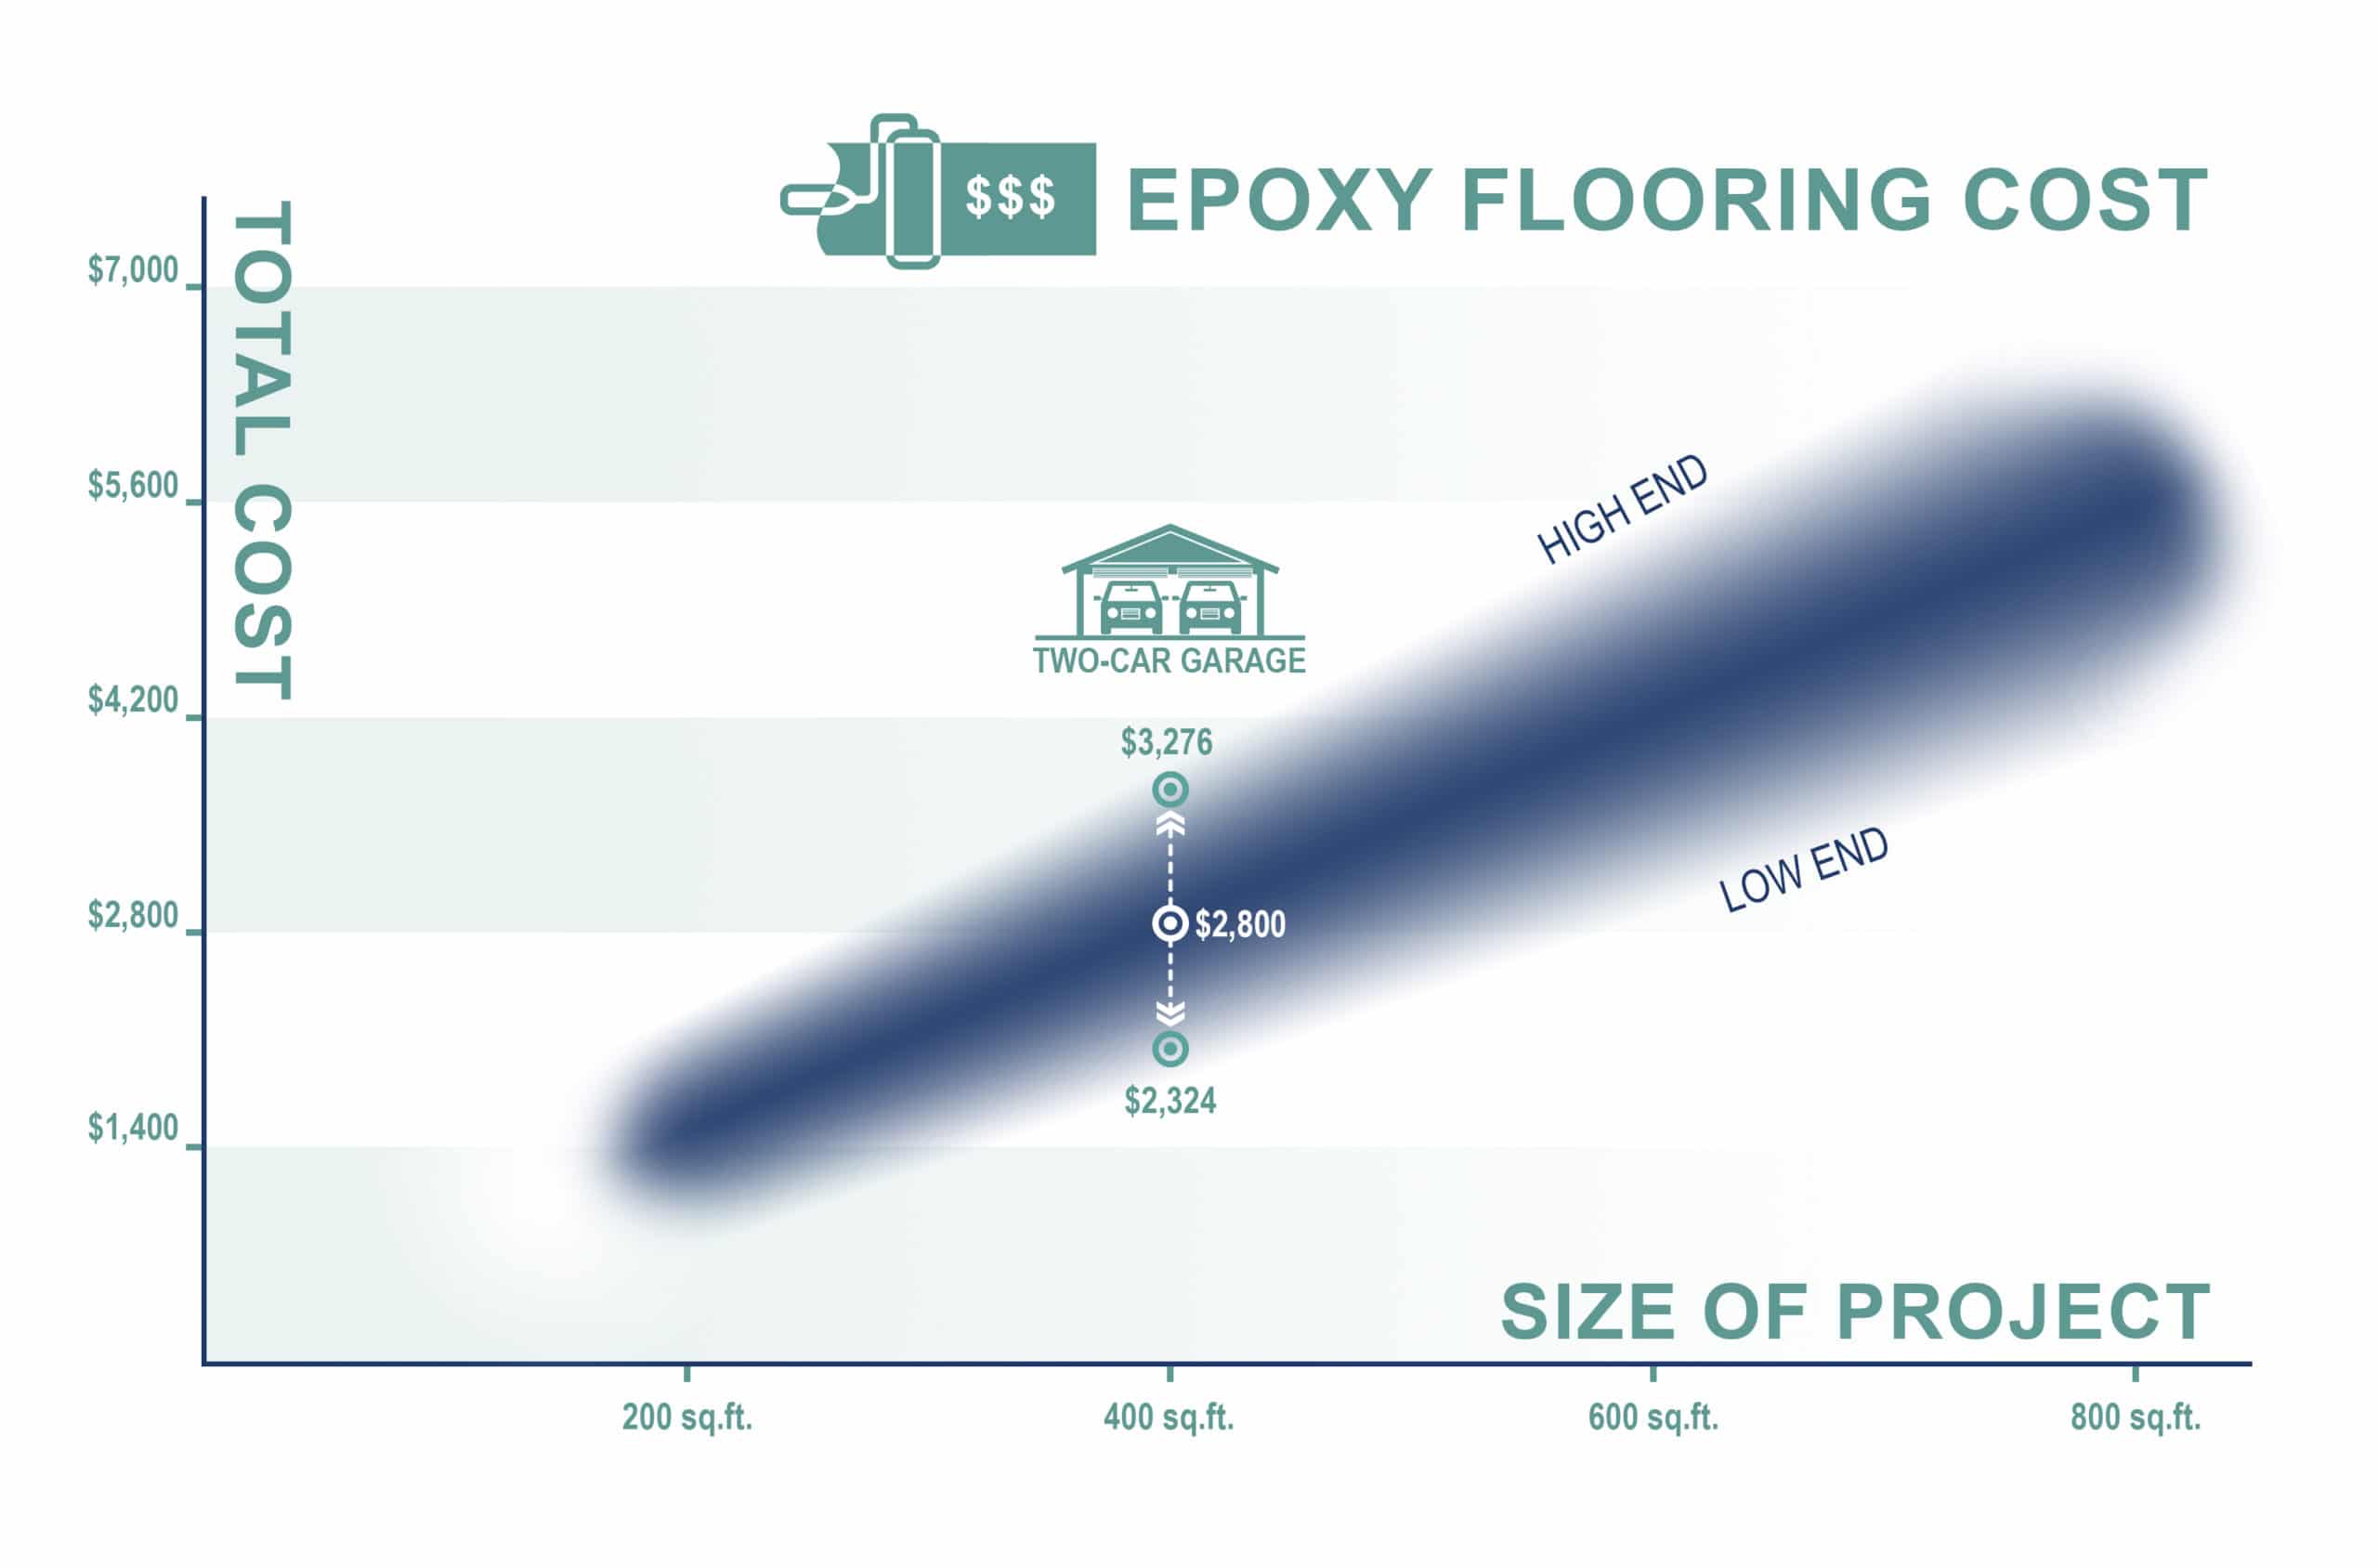 This graph shows the low, high, and average price for epoxy flooring from 200 sqarefoot  to 800 square foot and a 2 car garage at 400sq.